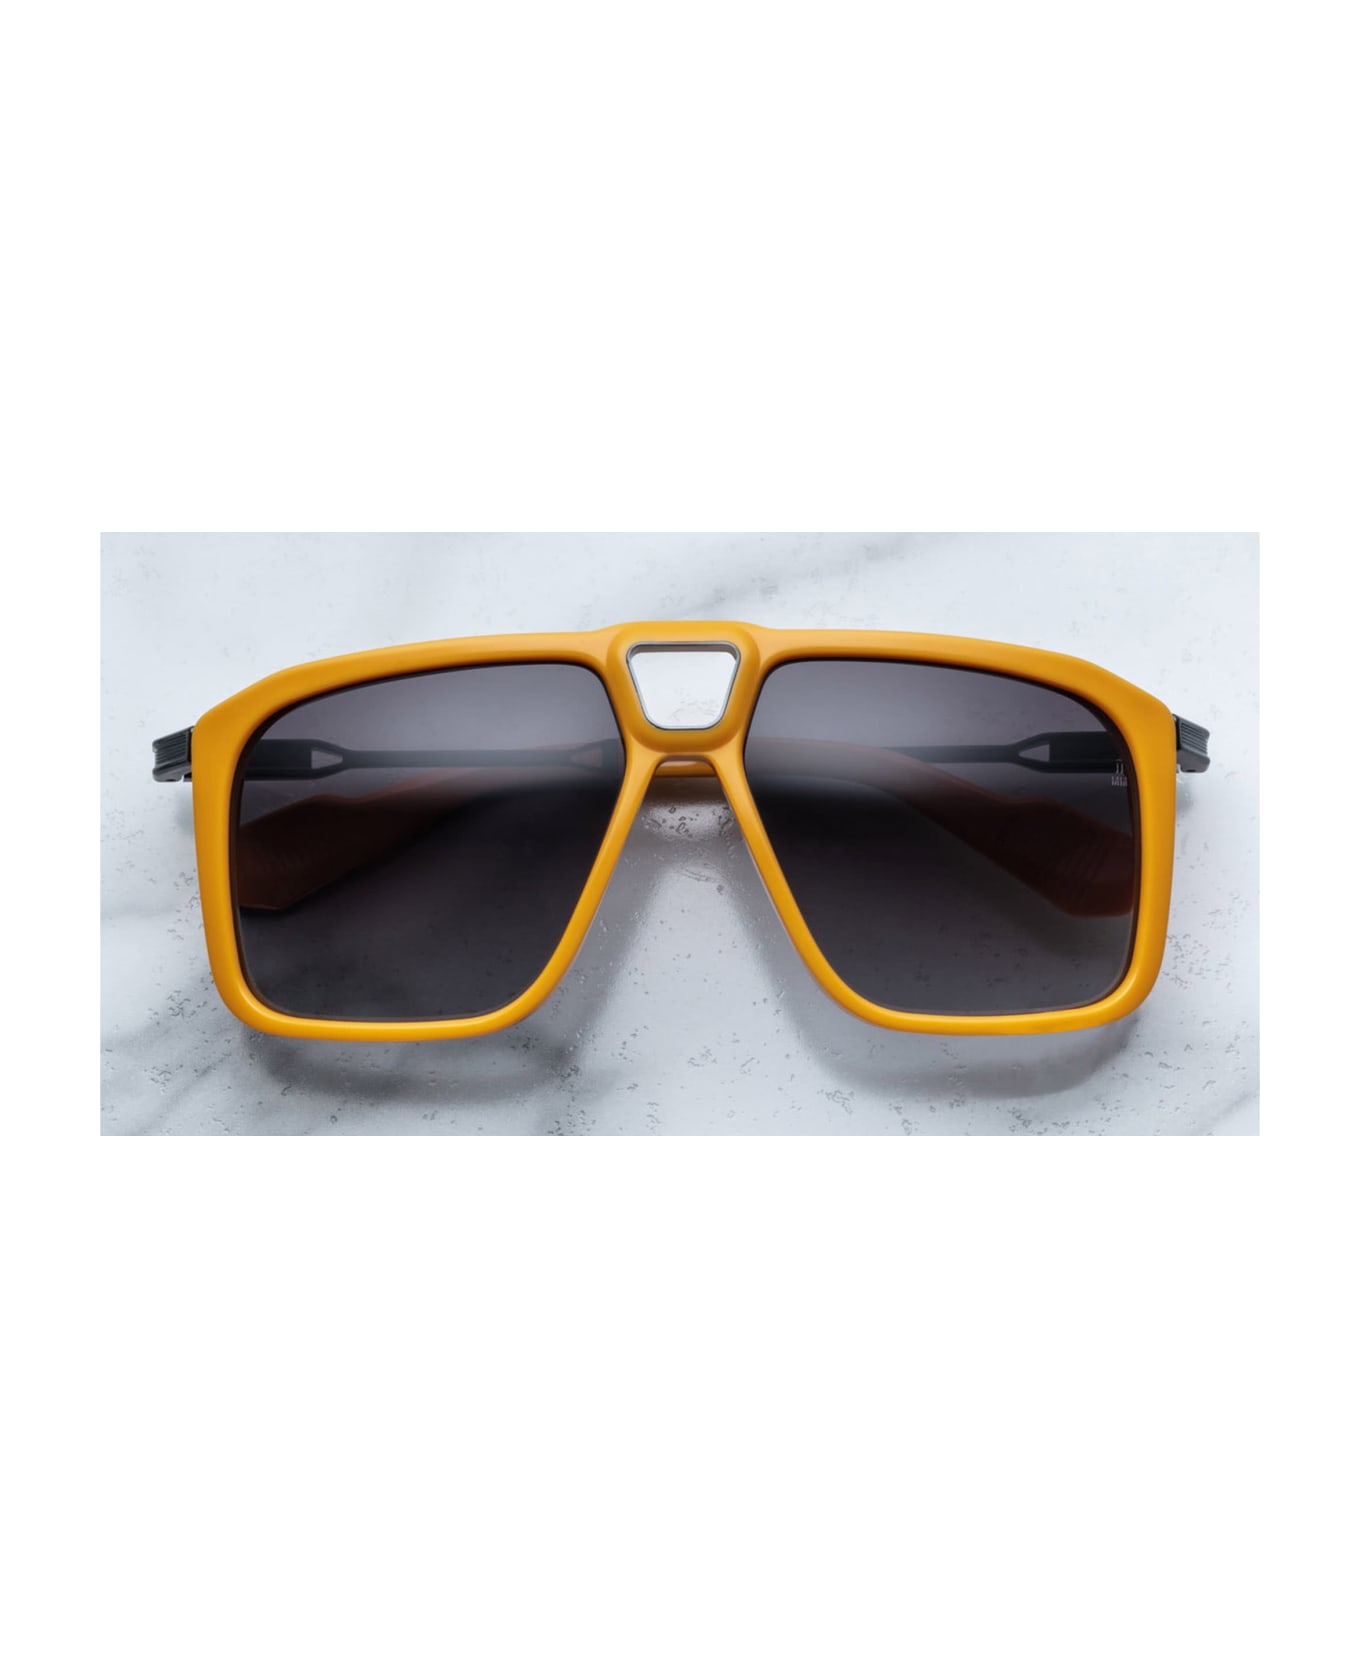 Jacques Marie Mage Savoy - Talbot Sunglasses - yellow